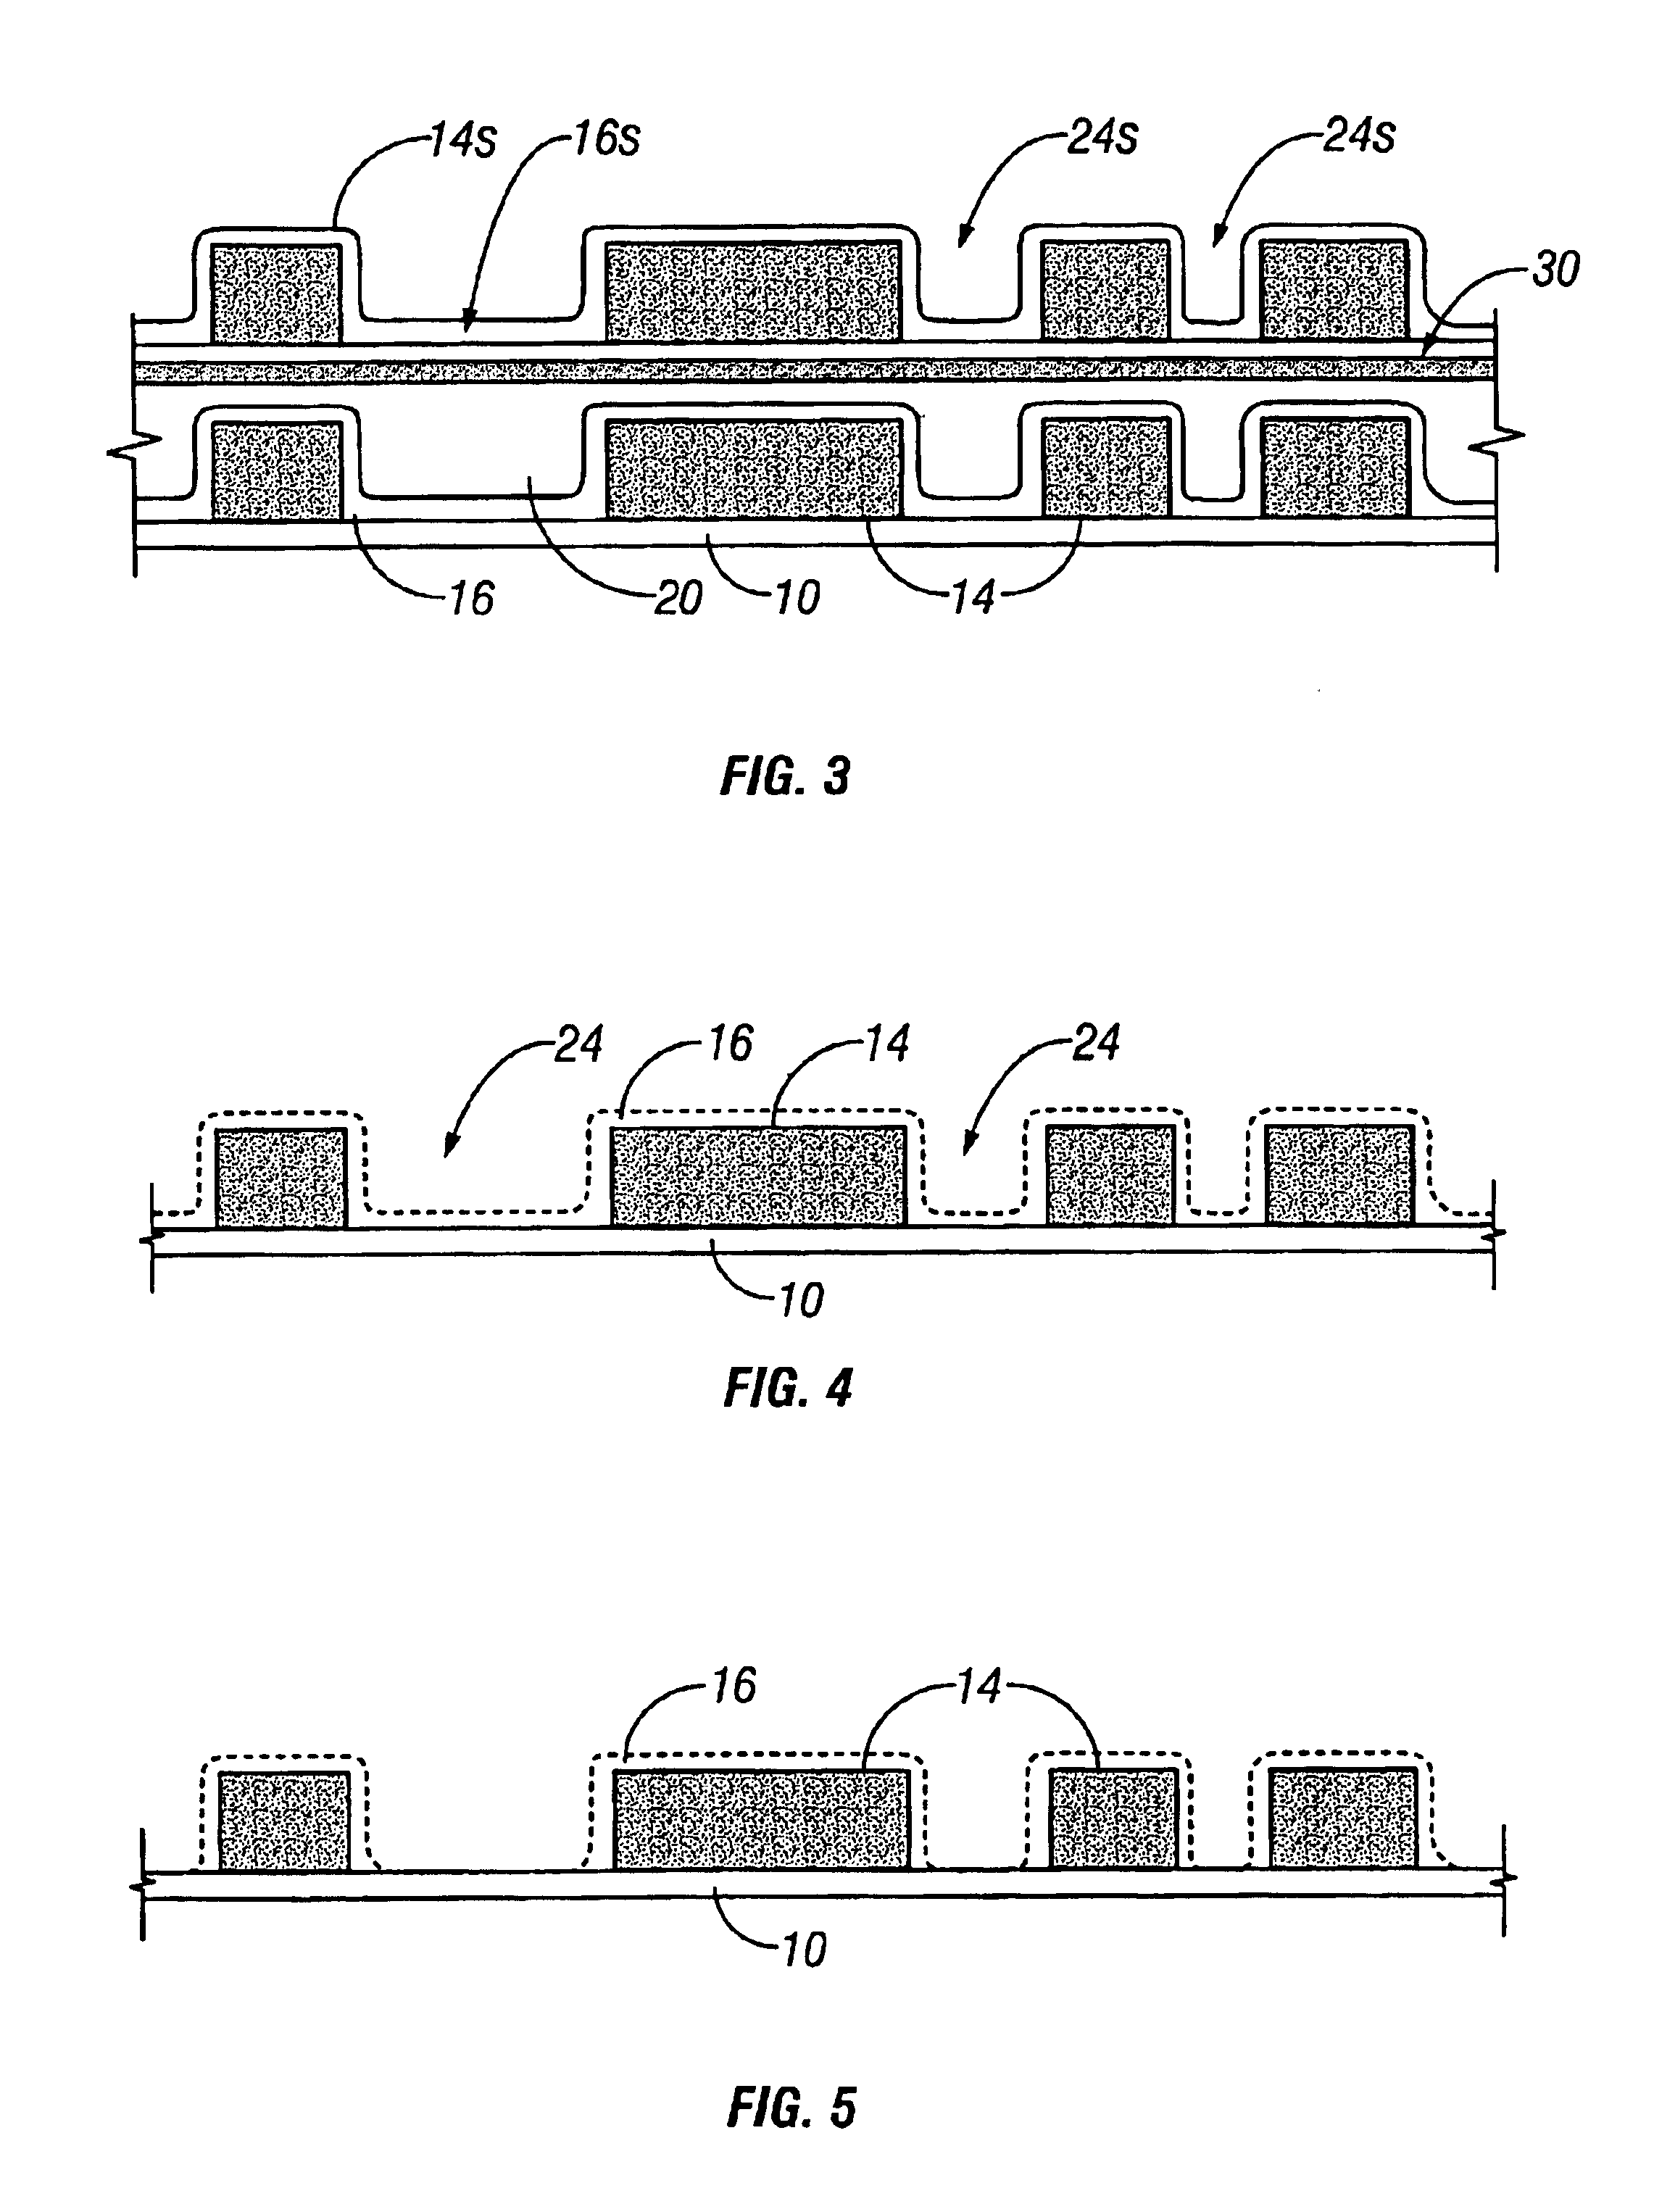 Multi-chip module and method for forming and method for deplating defective capacitors